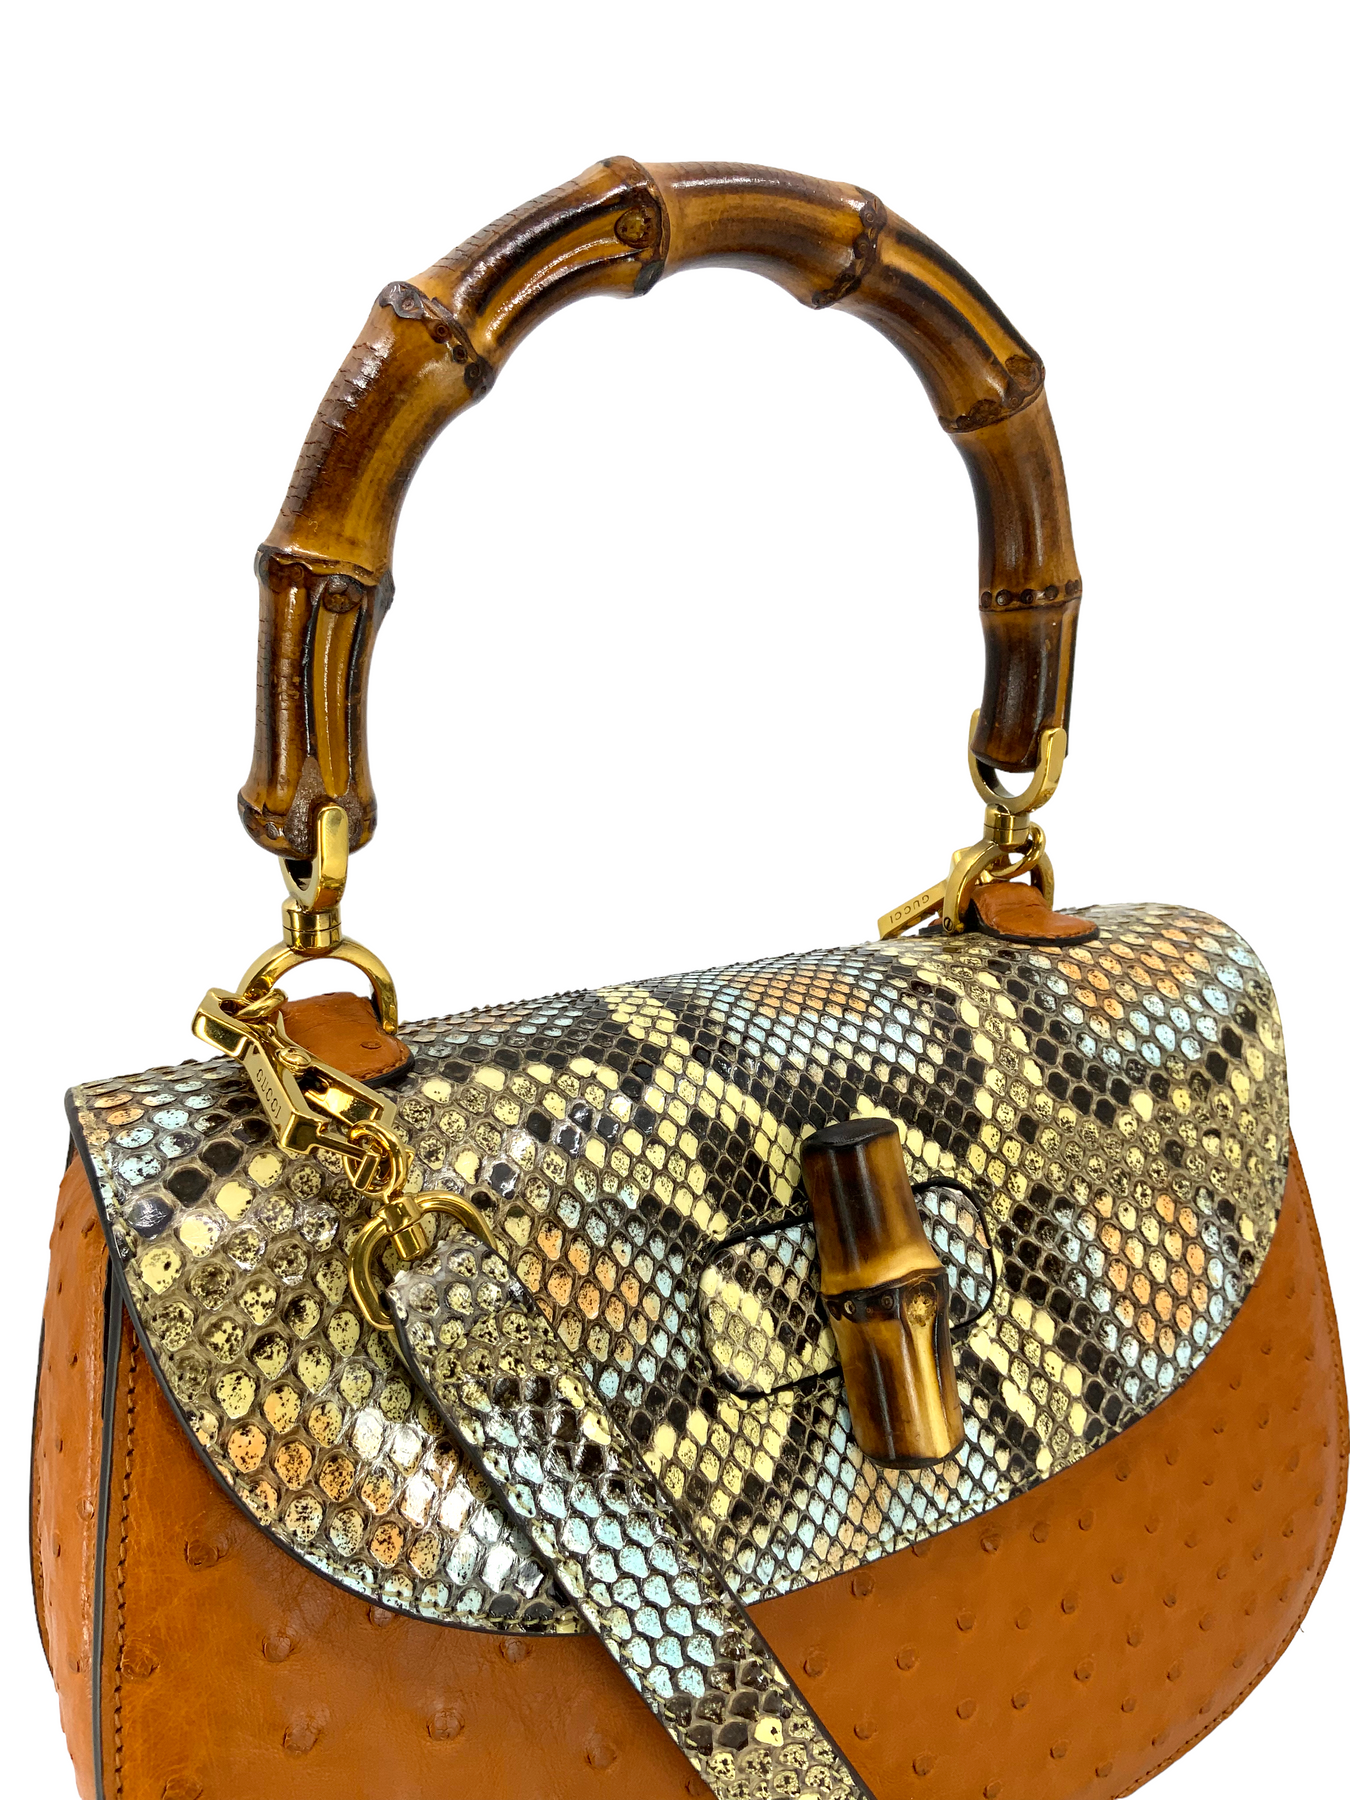 Gucci Bamboo 1947 small python bag in yellow